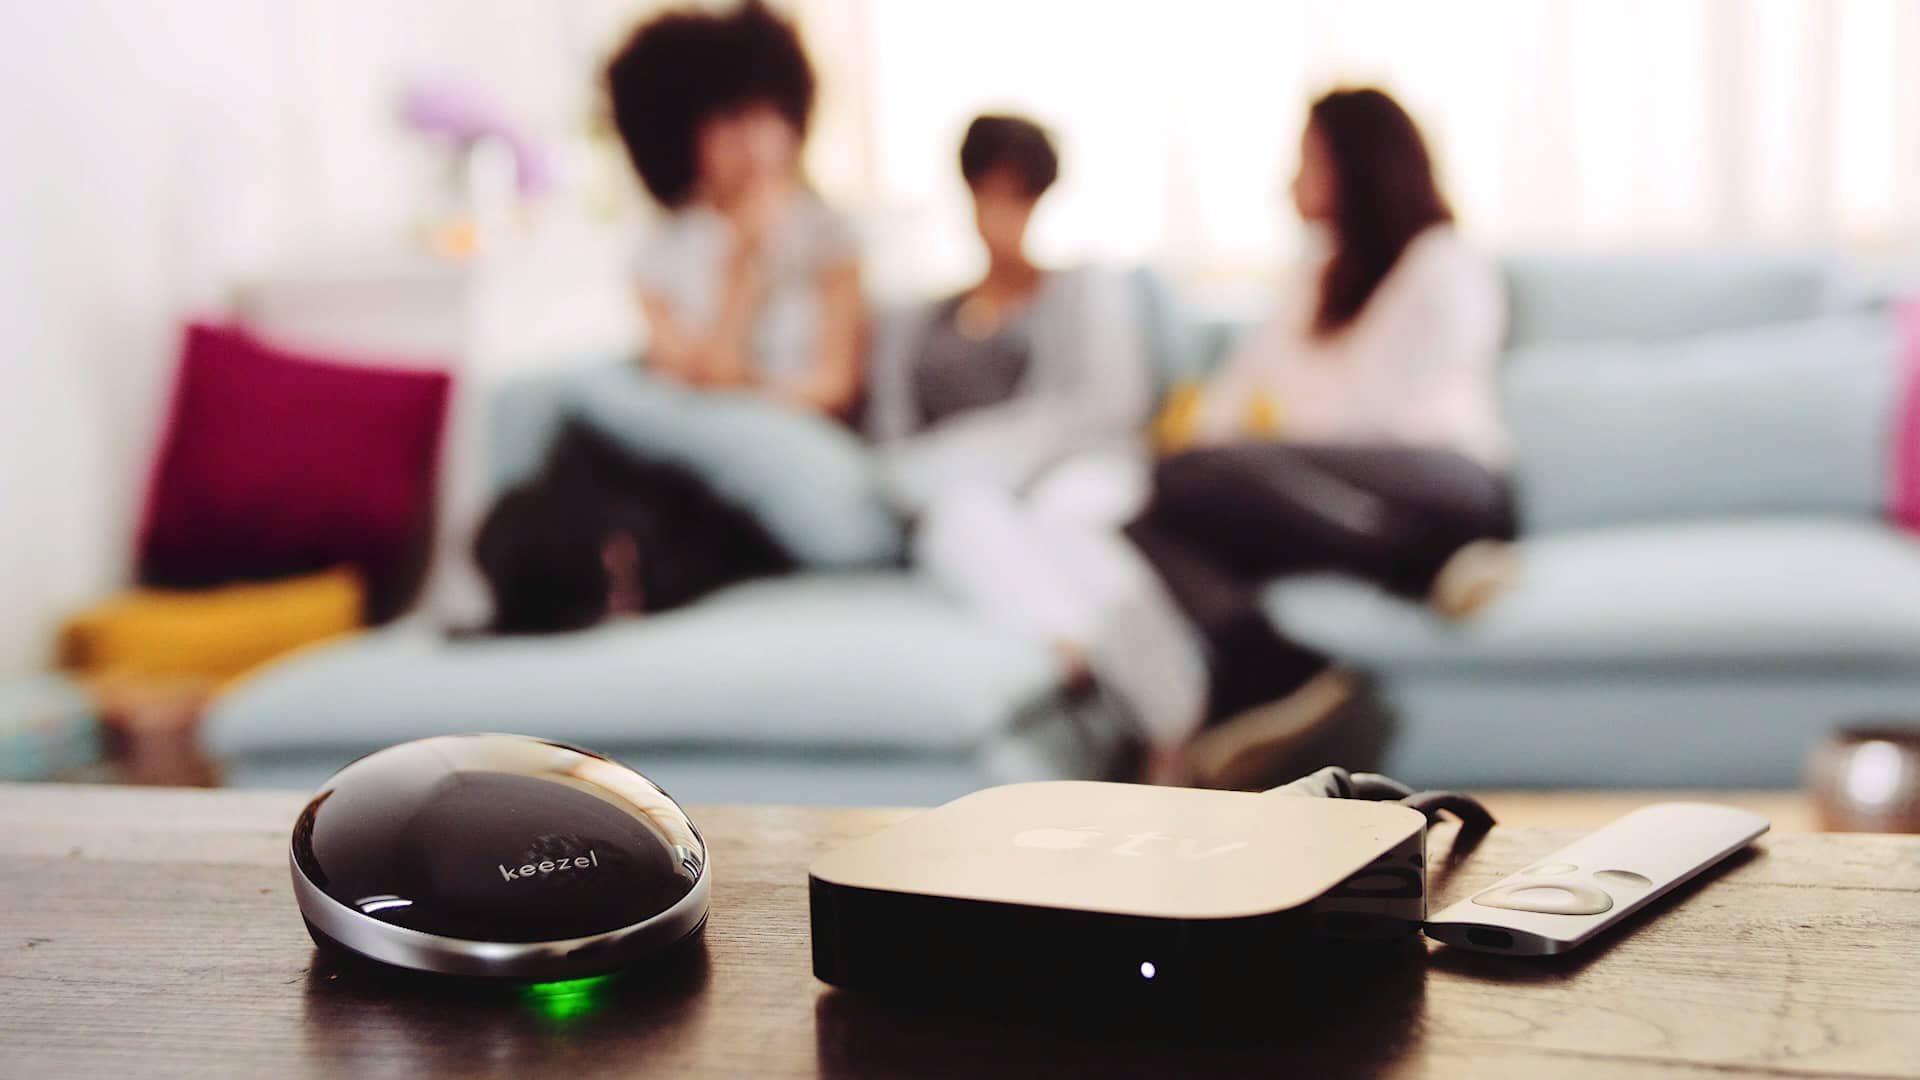 A Keezel with an Apple TV in a typical living room, allowing secure VPN access to networks anywhere.